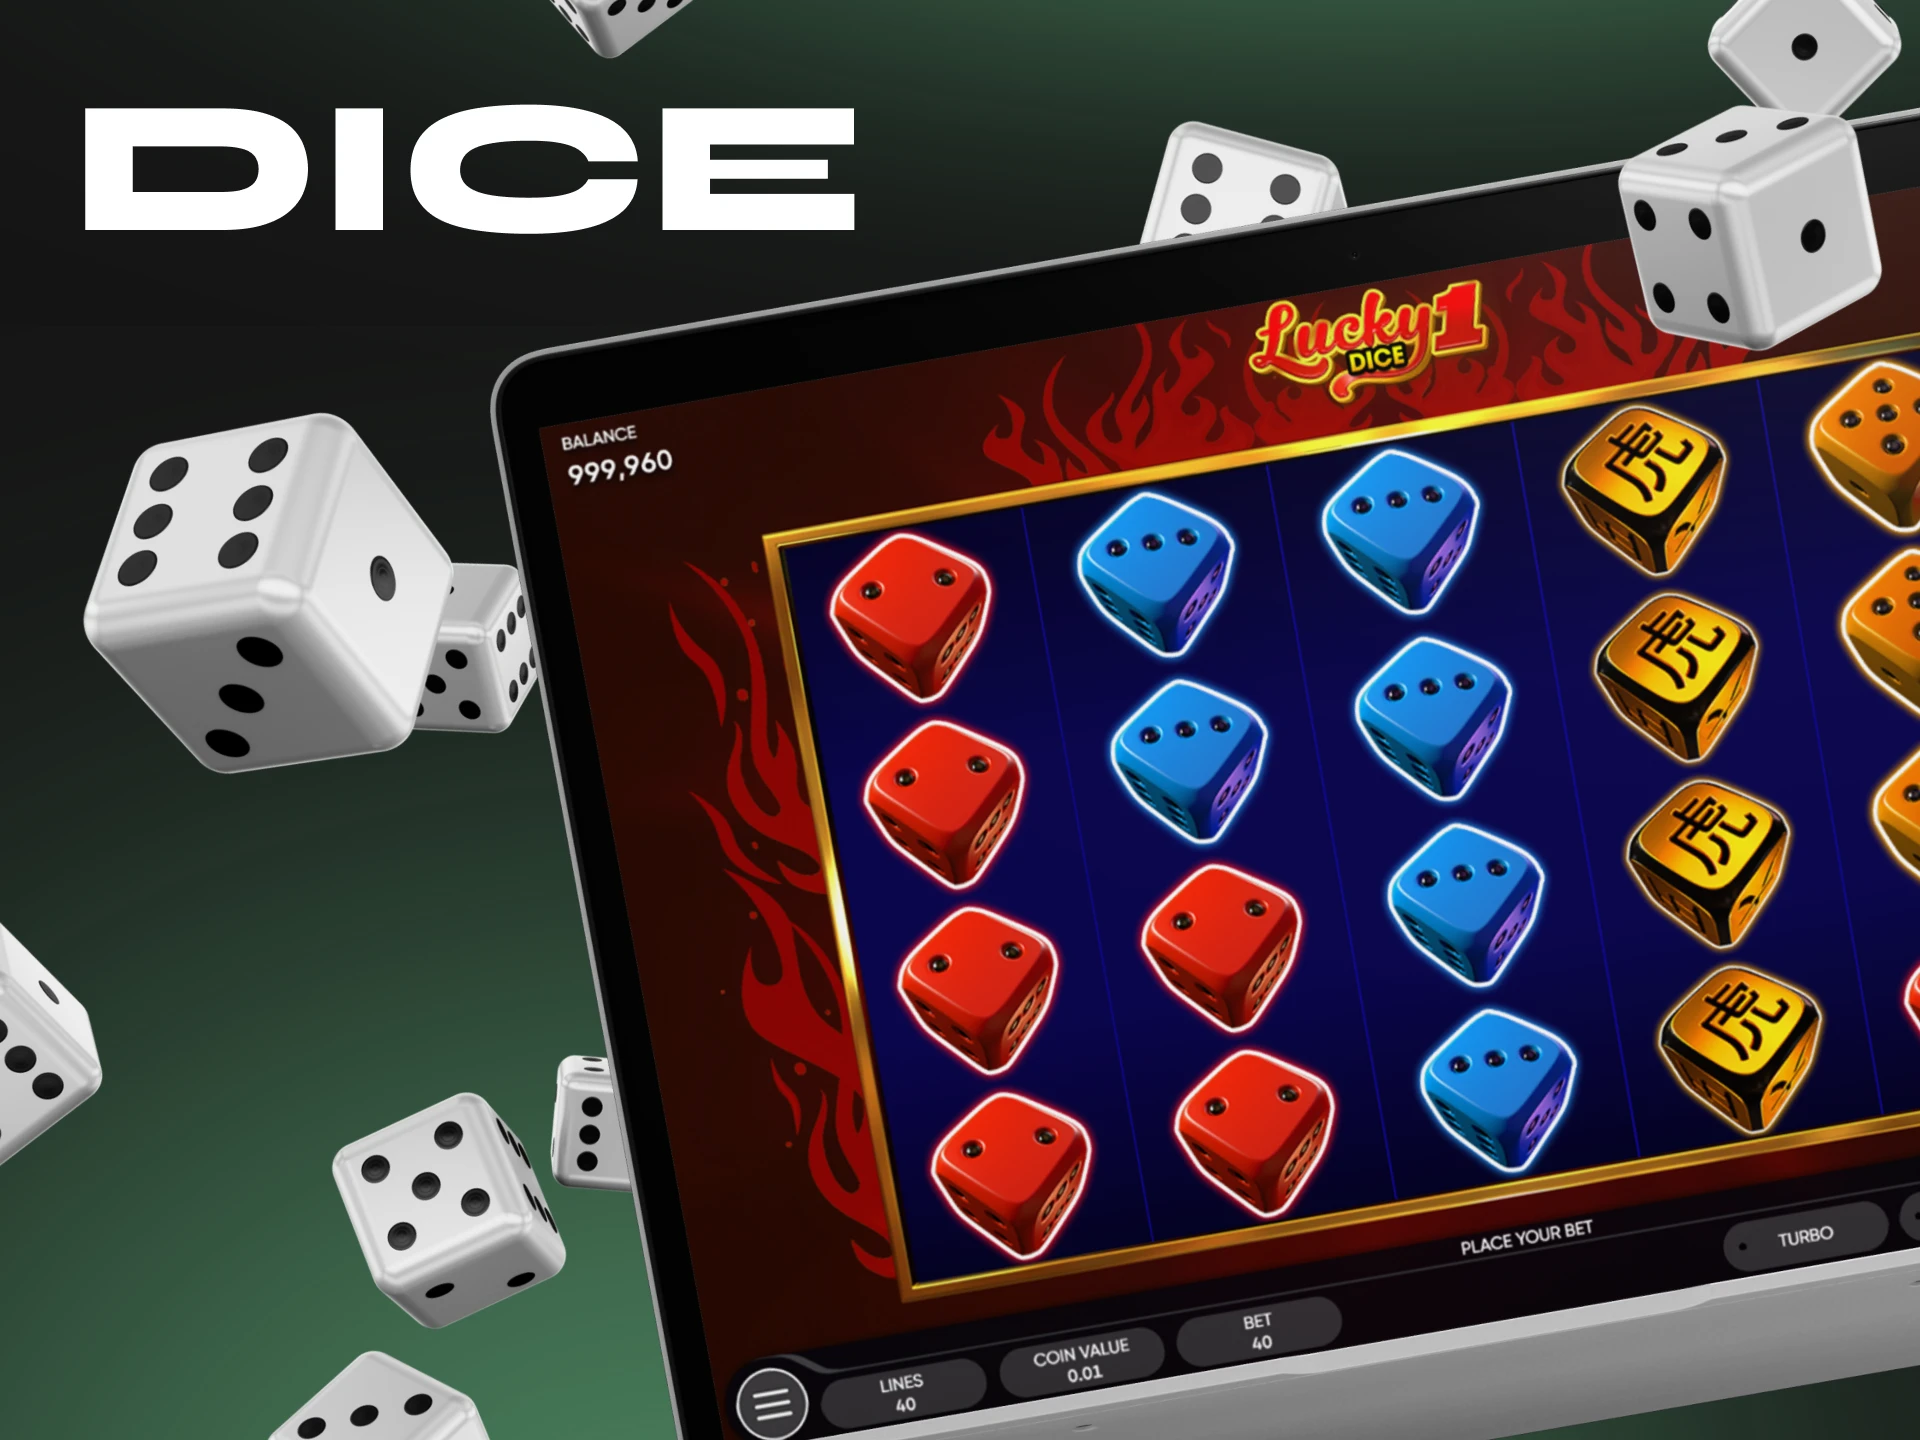 Dice is a really fun game, try betting on it.